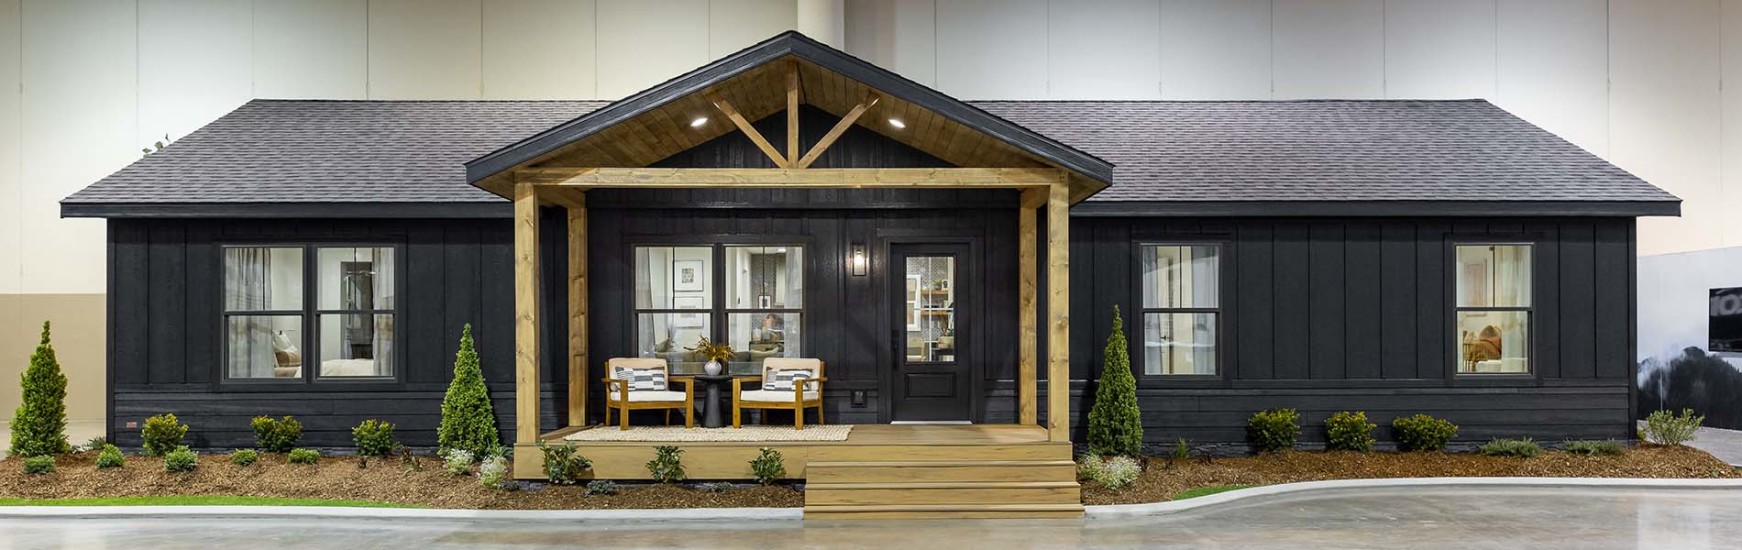 Exterior image of a dark colored manufactured home with a natural wood front porch. The home is net-zero electricity. 